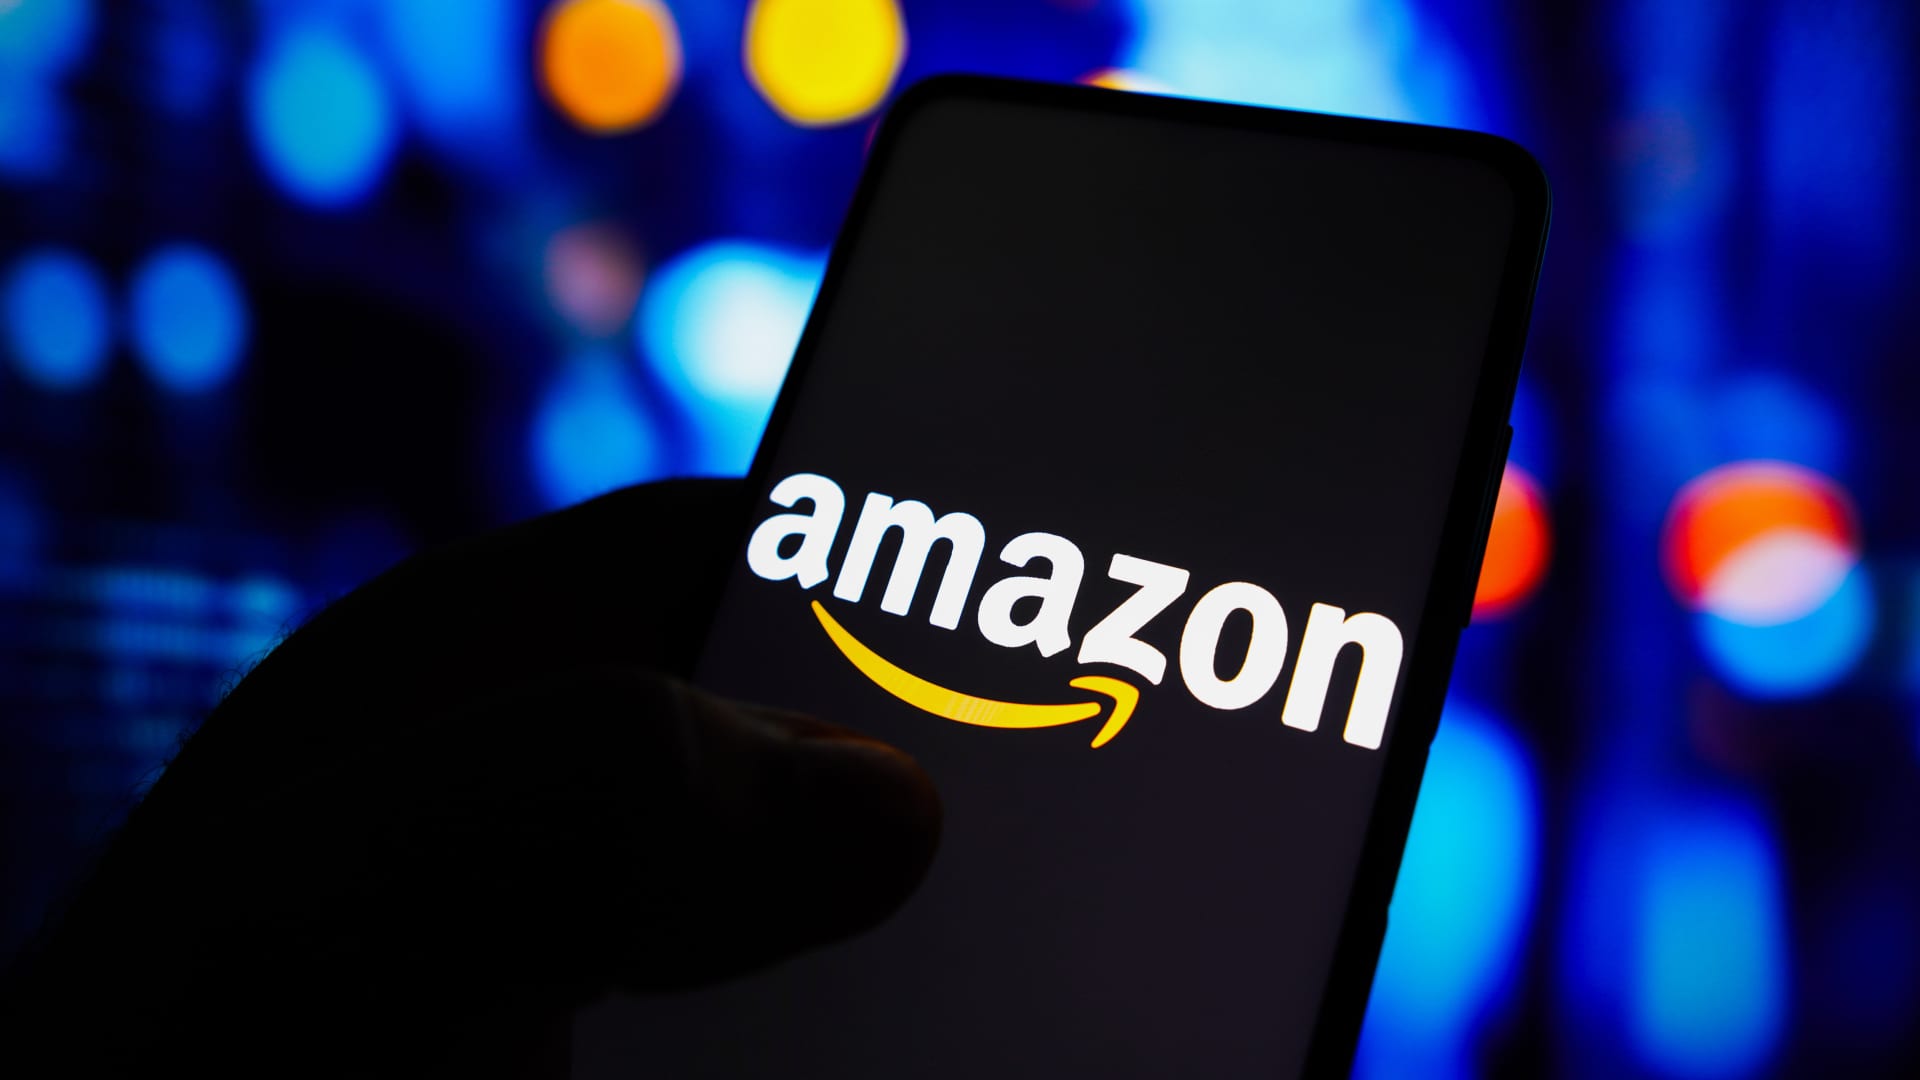 In this photo illustration, the Amazon logo is displayed on a smartphone screen.